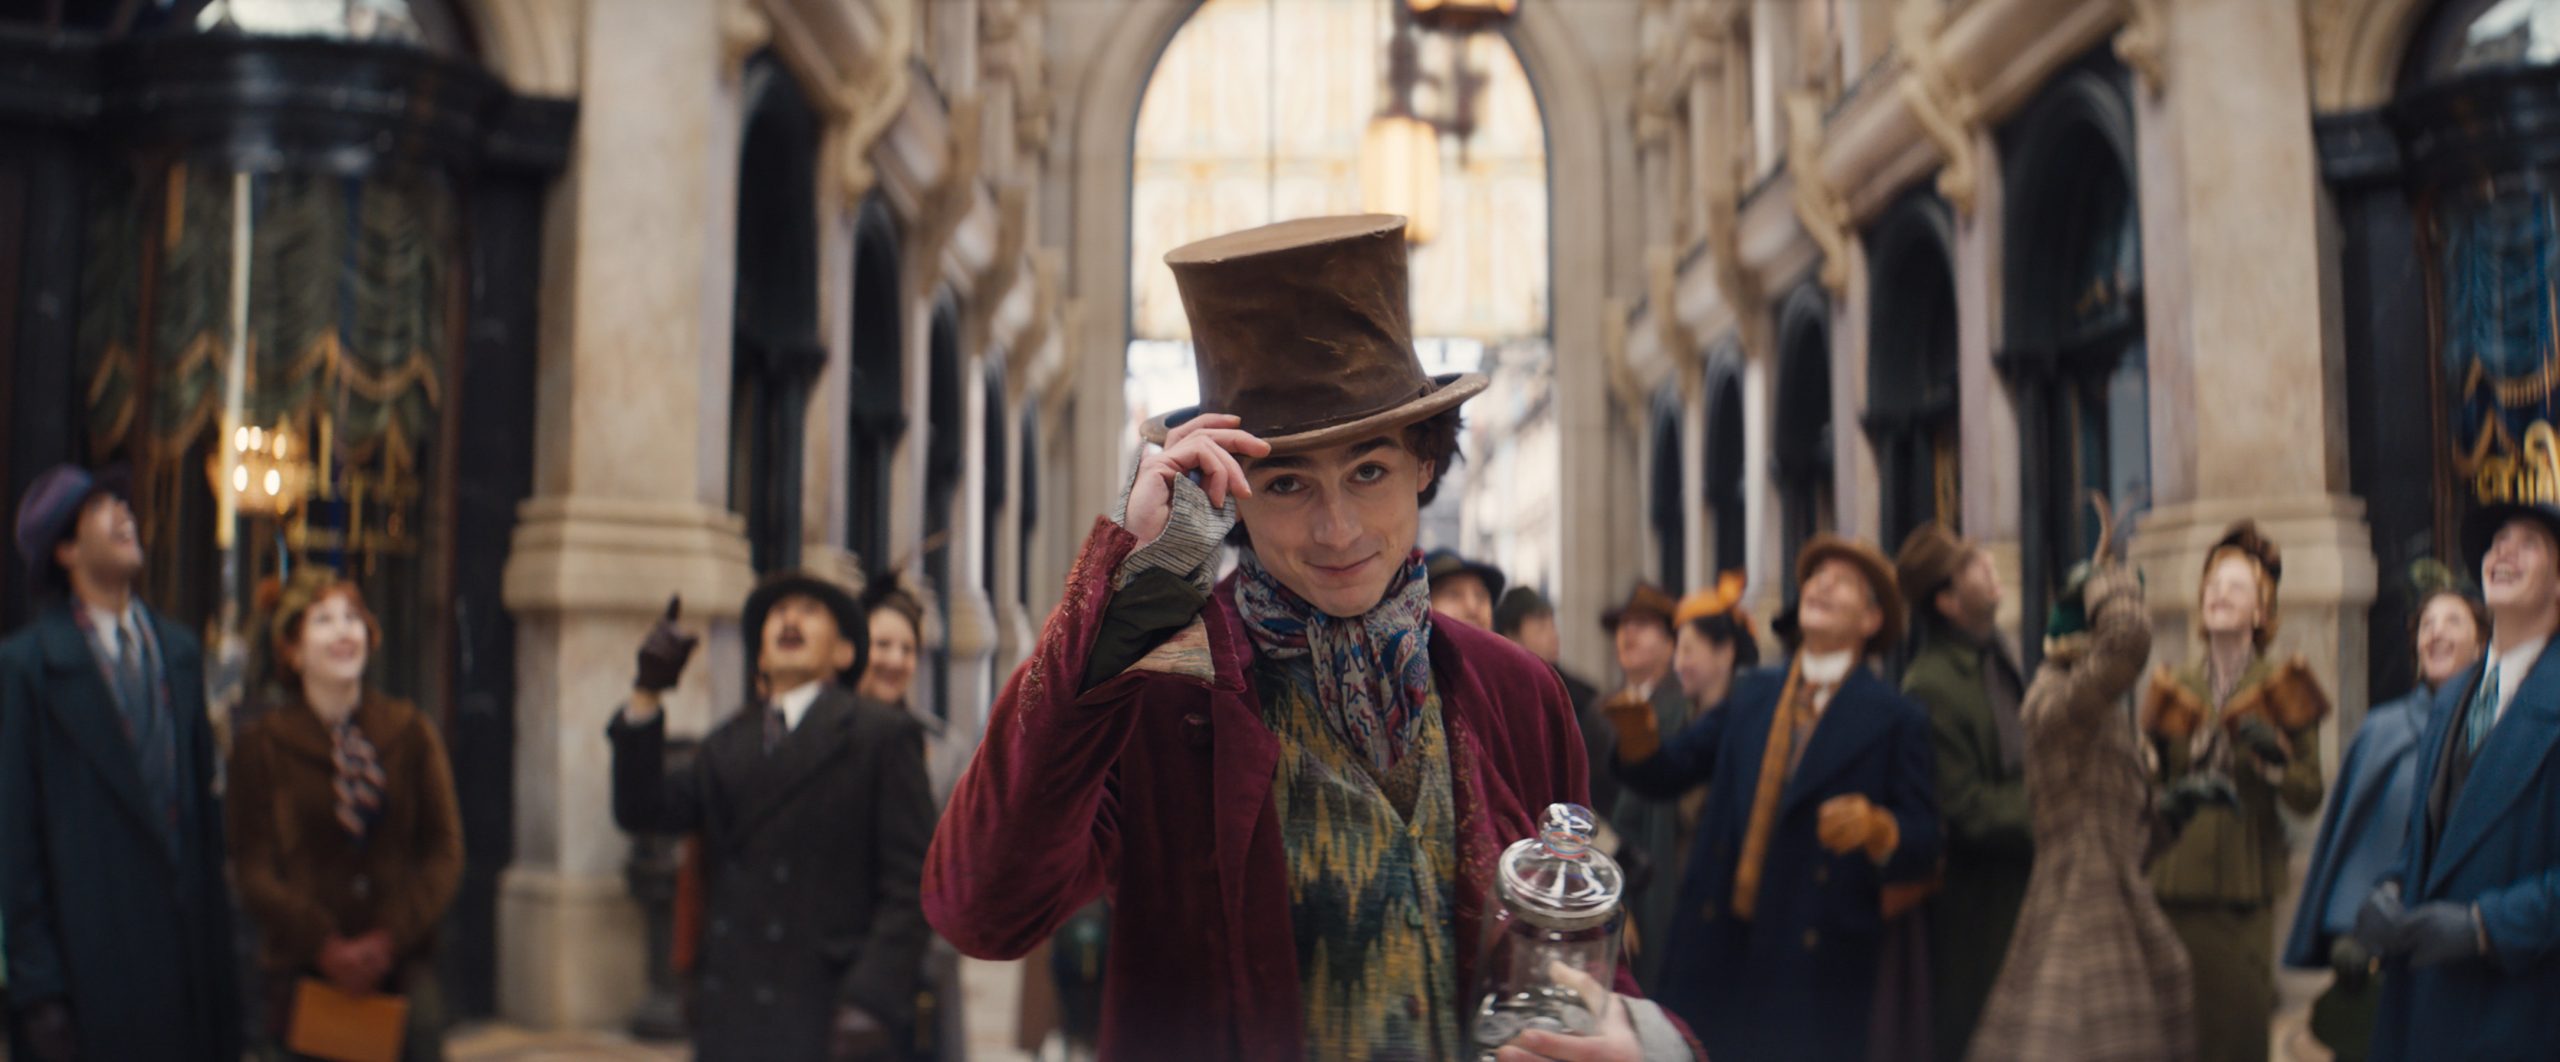 timothee-chalamet-is-all-smiles-and-madcap-energy-in-the-first-trailer-for-‘wonka’